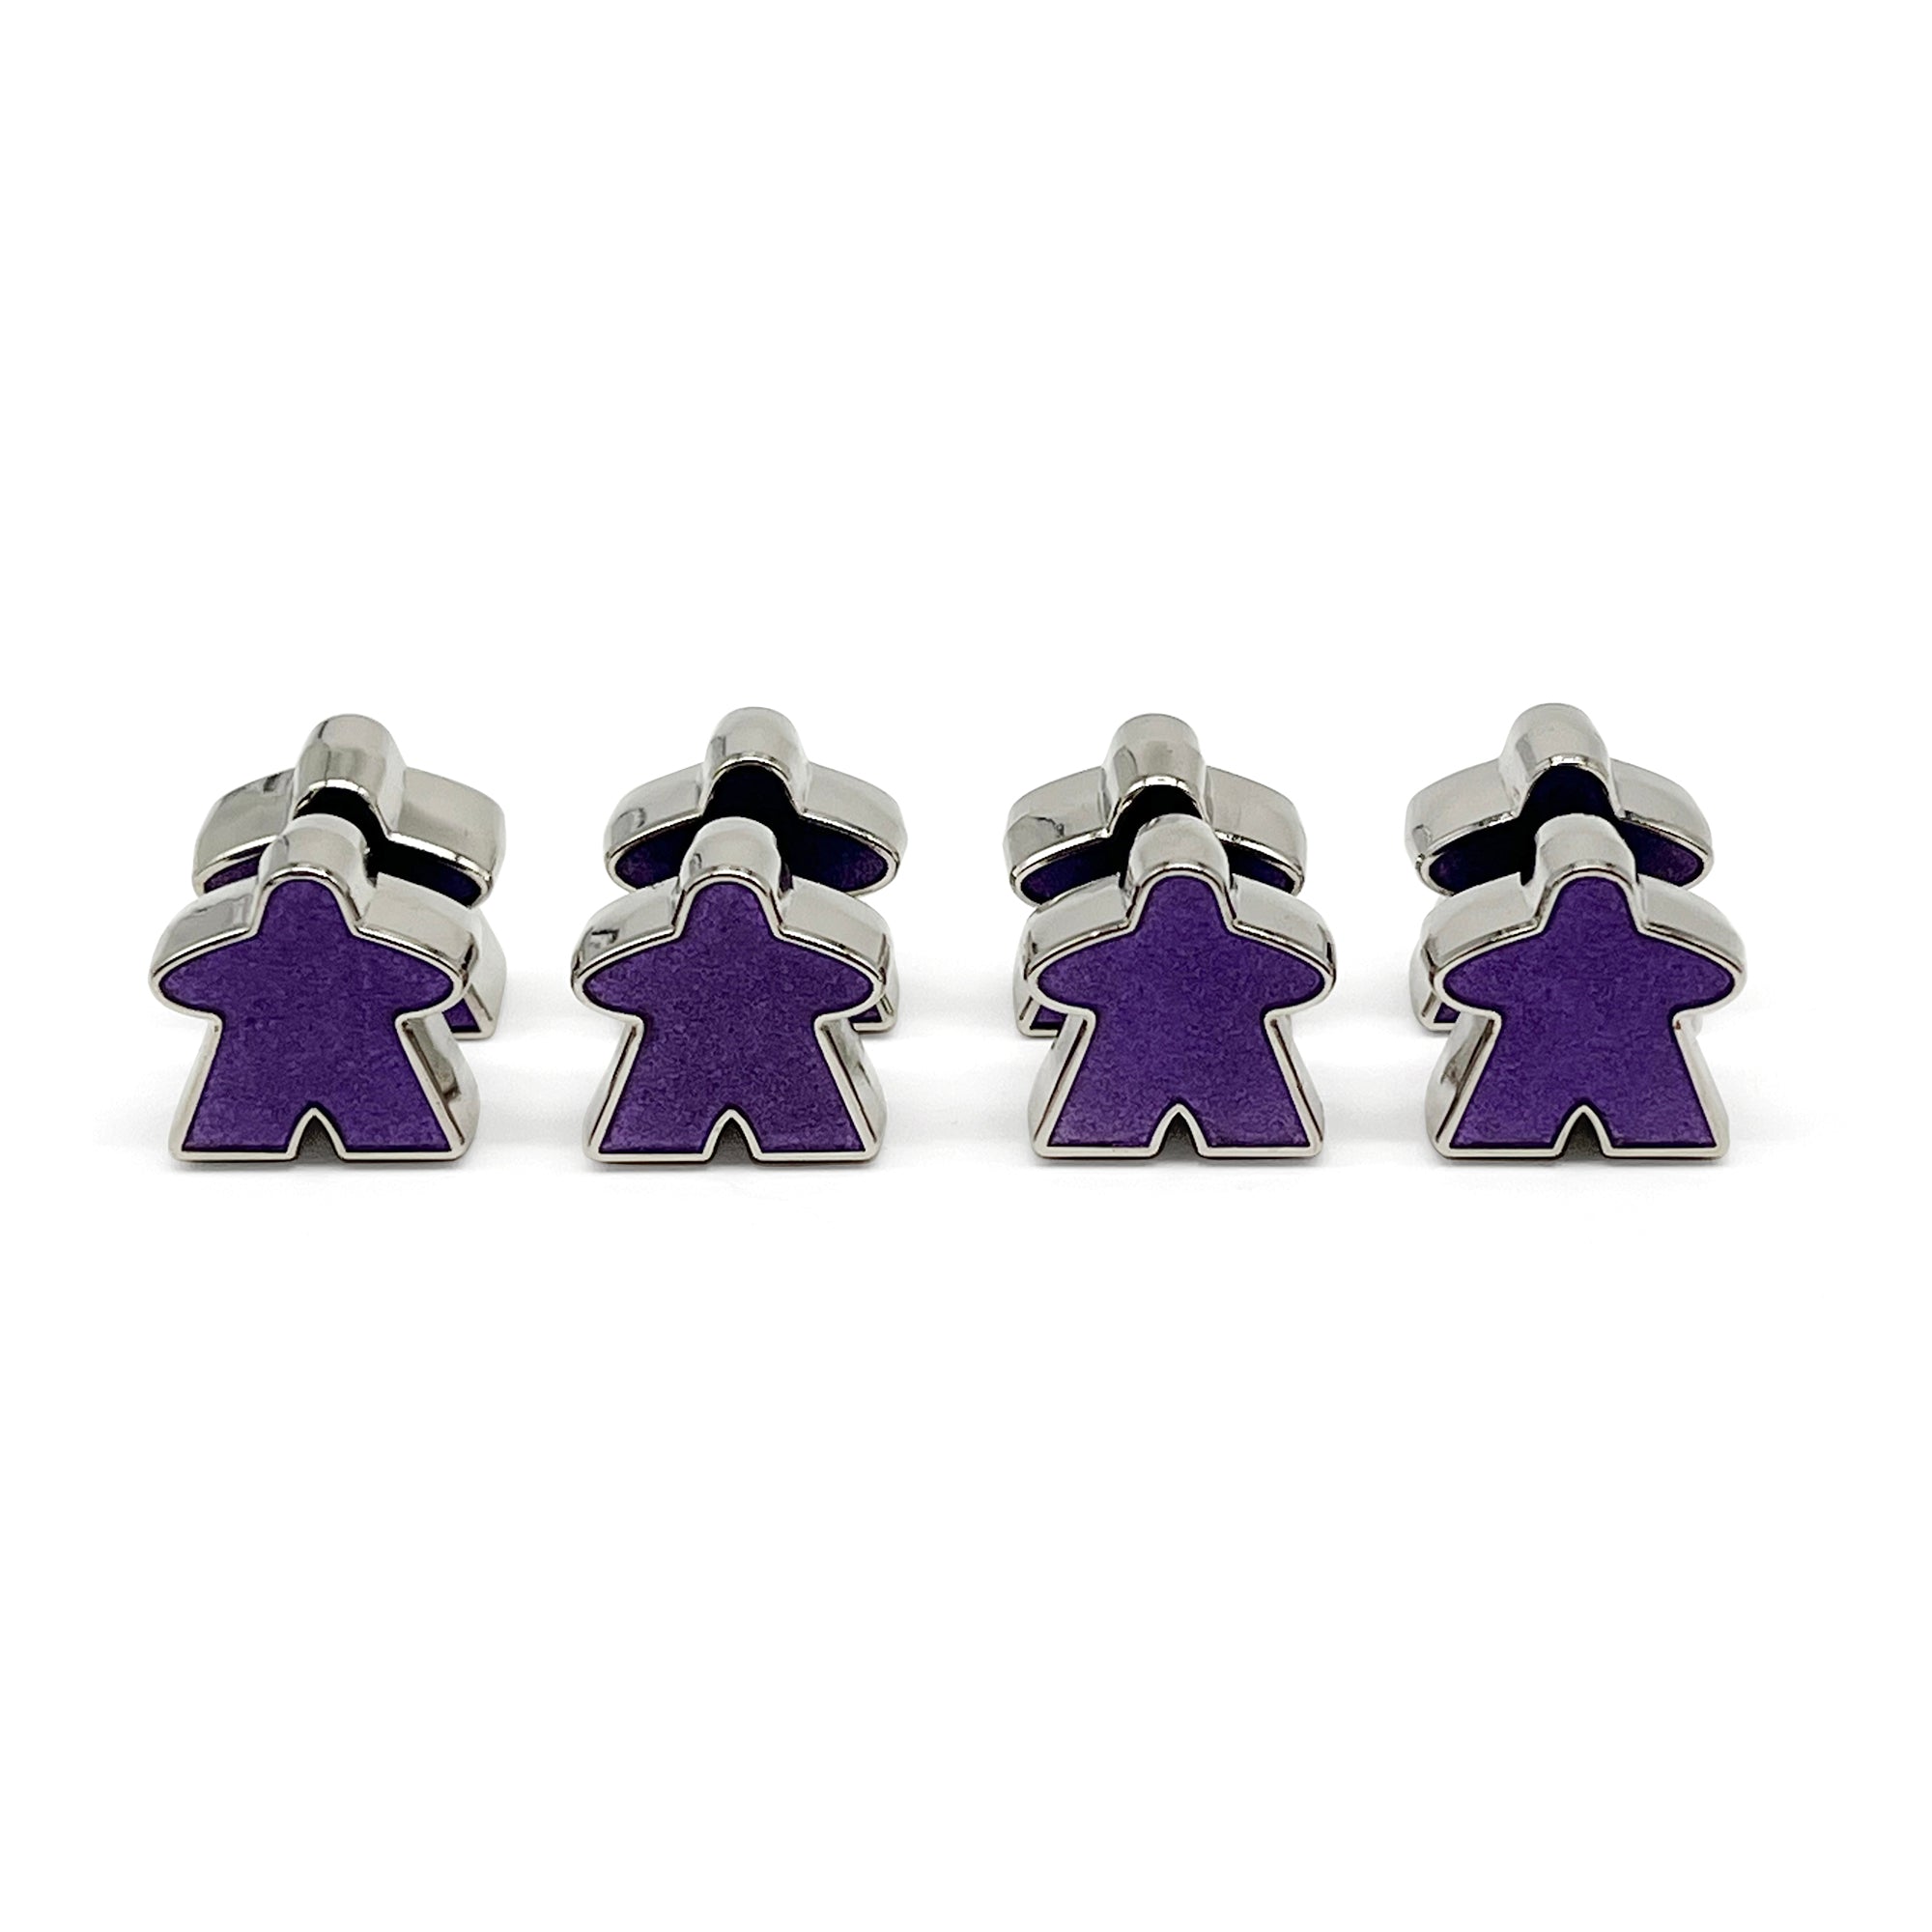 8 Pack of Purple Enamel Meeples by Norse Foundry - NOR 03476